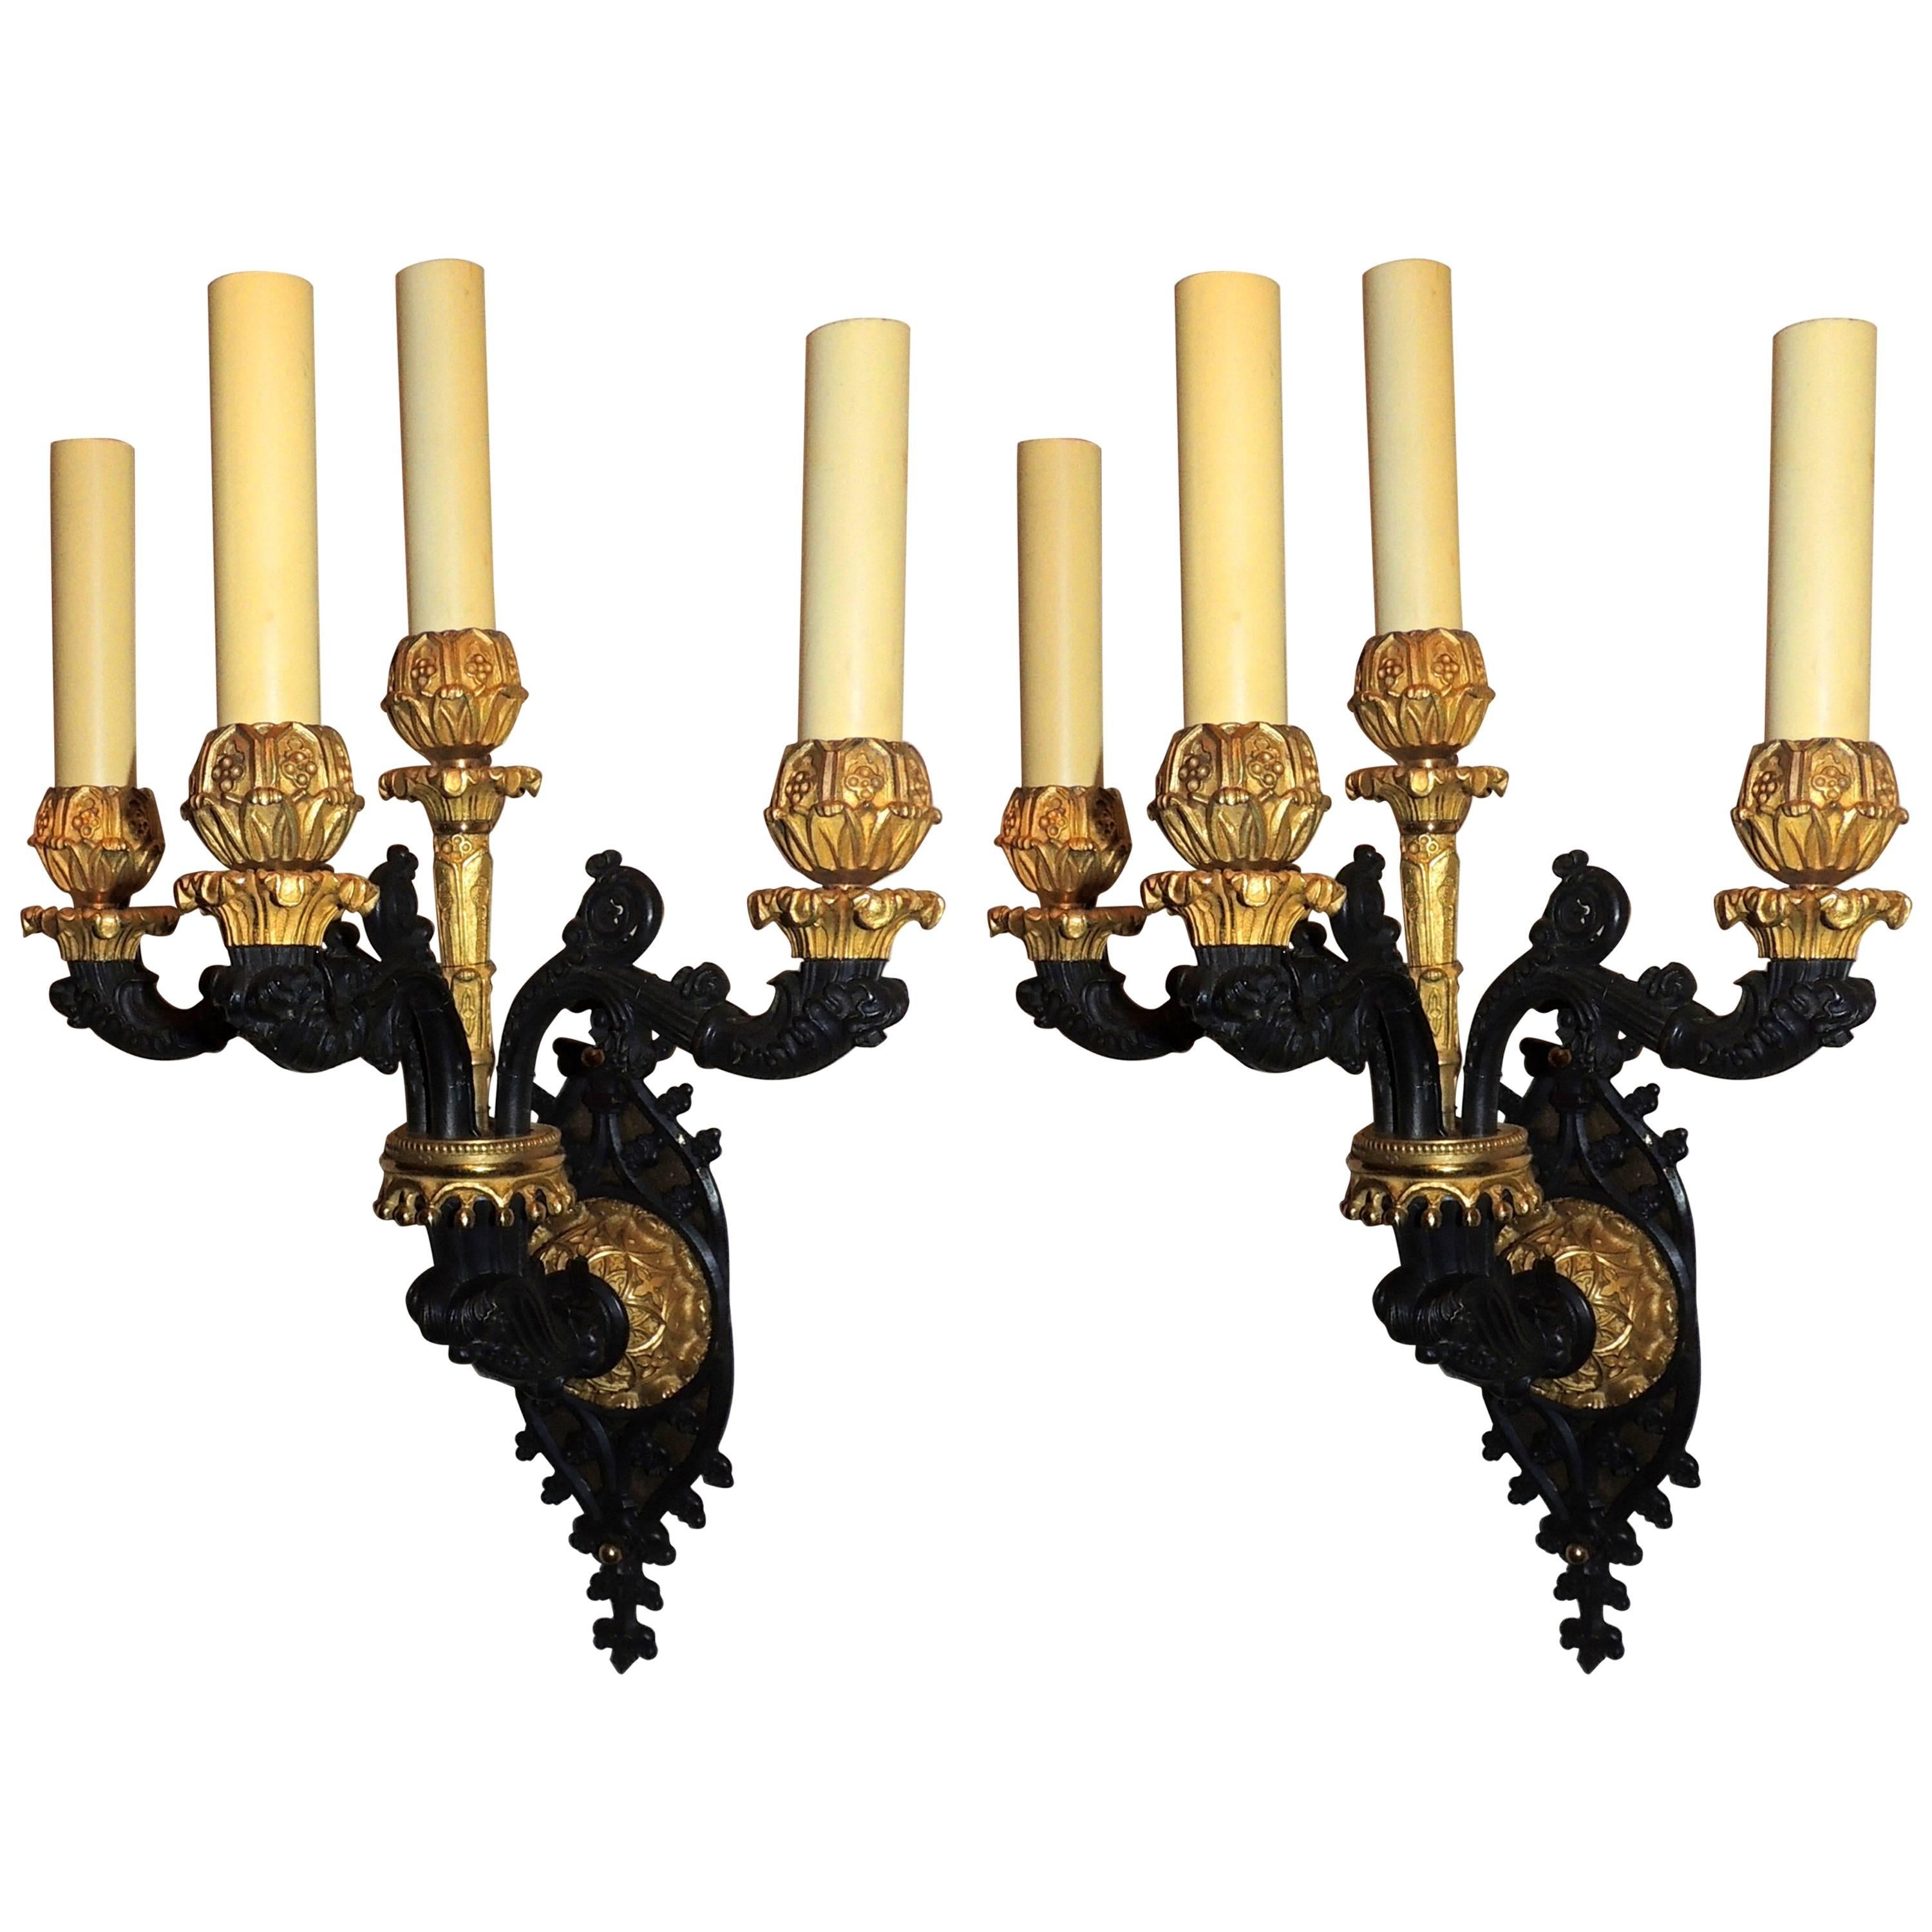 Pair of French Empire Neoclassical Regency Gilt Bronze Patinated Sconces For Sale